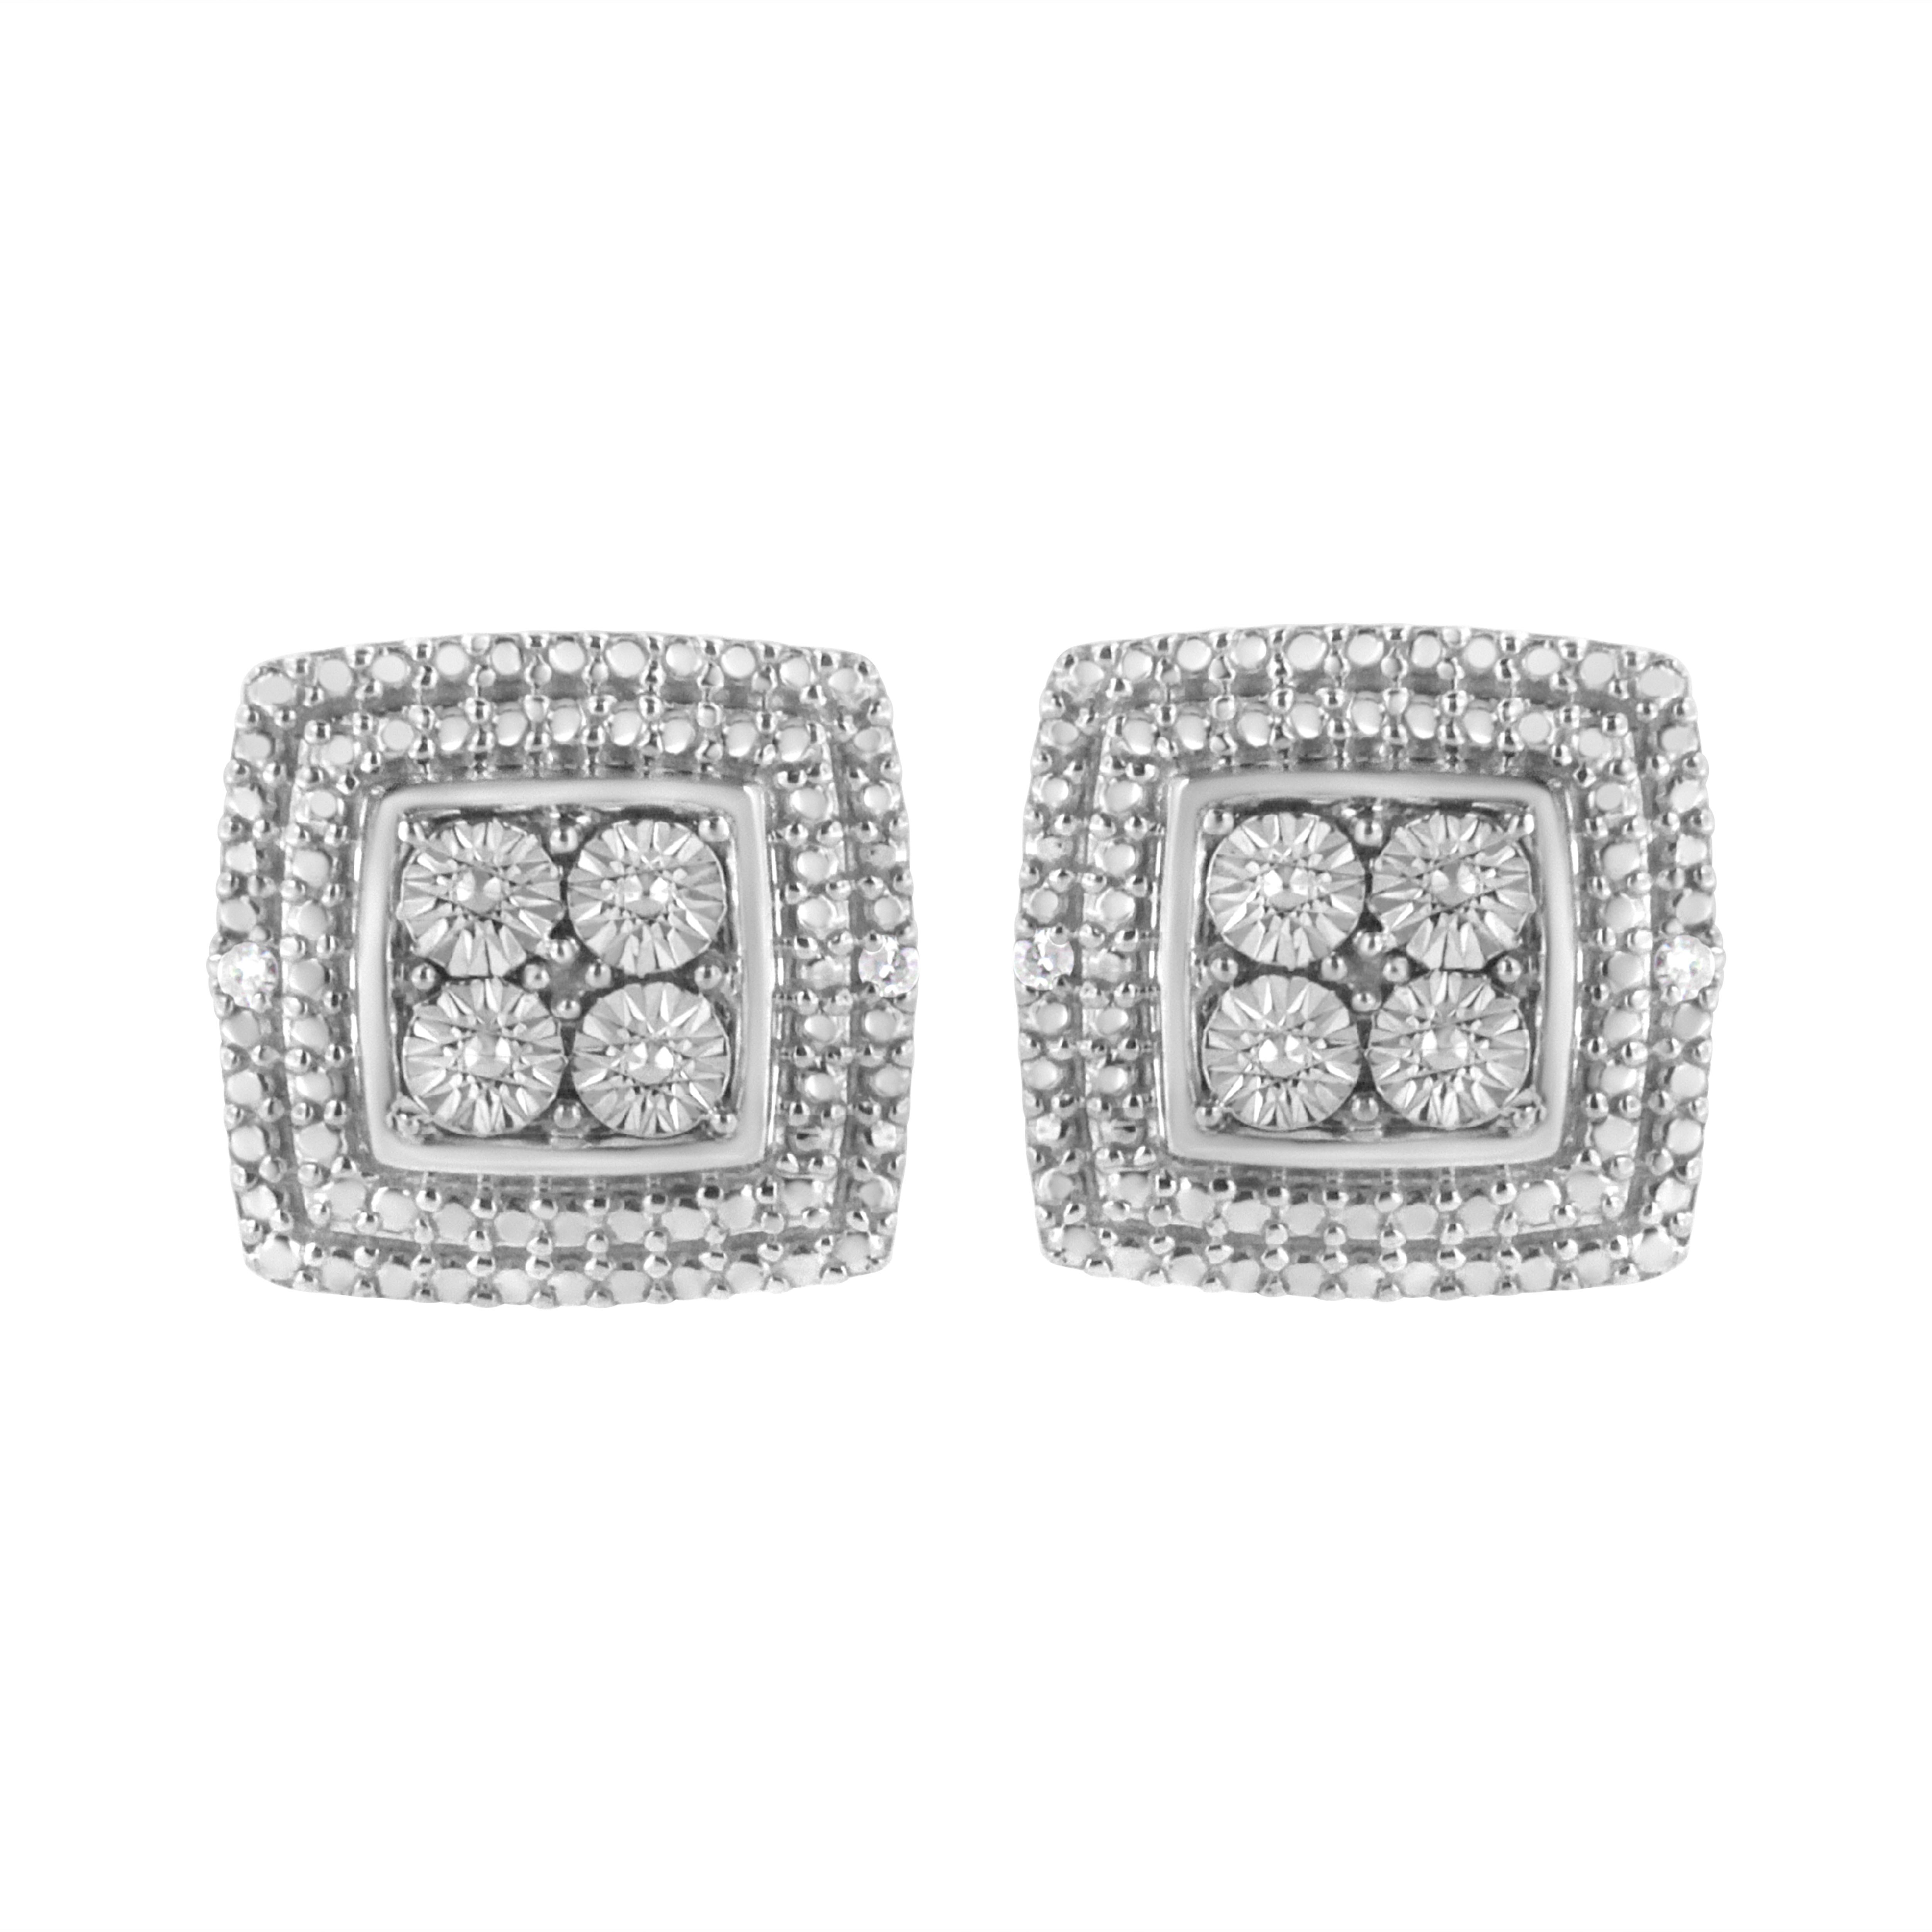 This gorgeous pair of square shaped studs are crafted in the finest .925 sterling silver. Featuring two diamonds each on the outer edges of each stud, this piece has a unique design of beaded and smooth sterling silver. This unique piece comes with